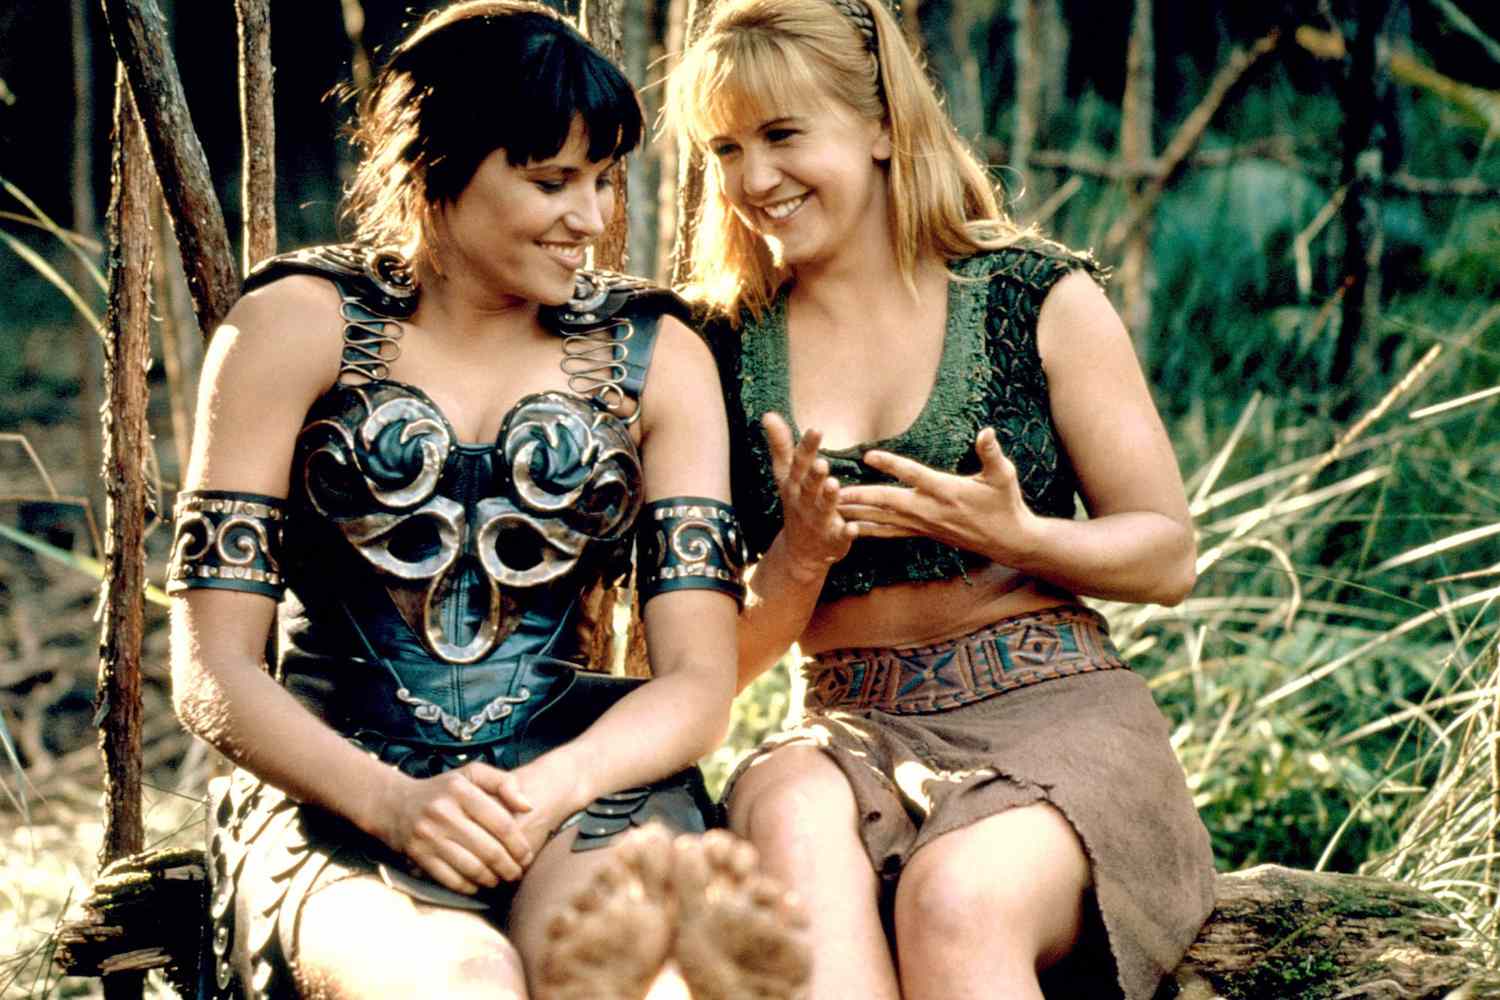 XENA: WARRIOR PRINCESS, (from left): Lucy Lawless, Renee O&apos;Connor, &apos;A Day In The Life&apos;, (Season 2,